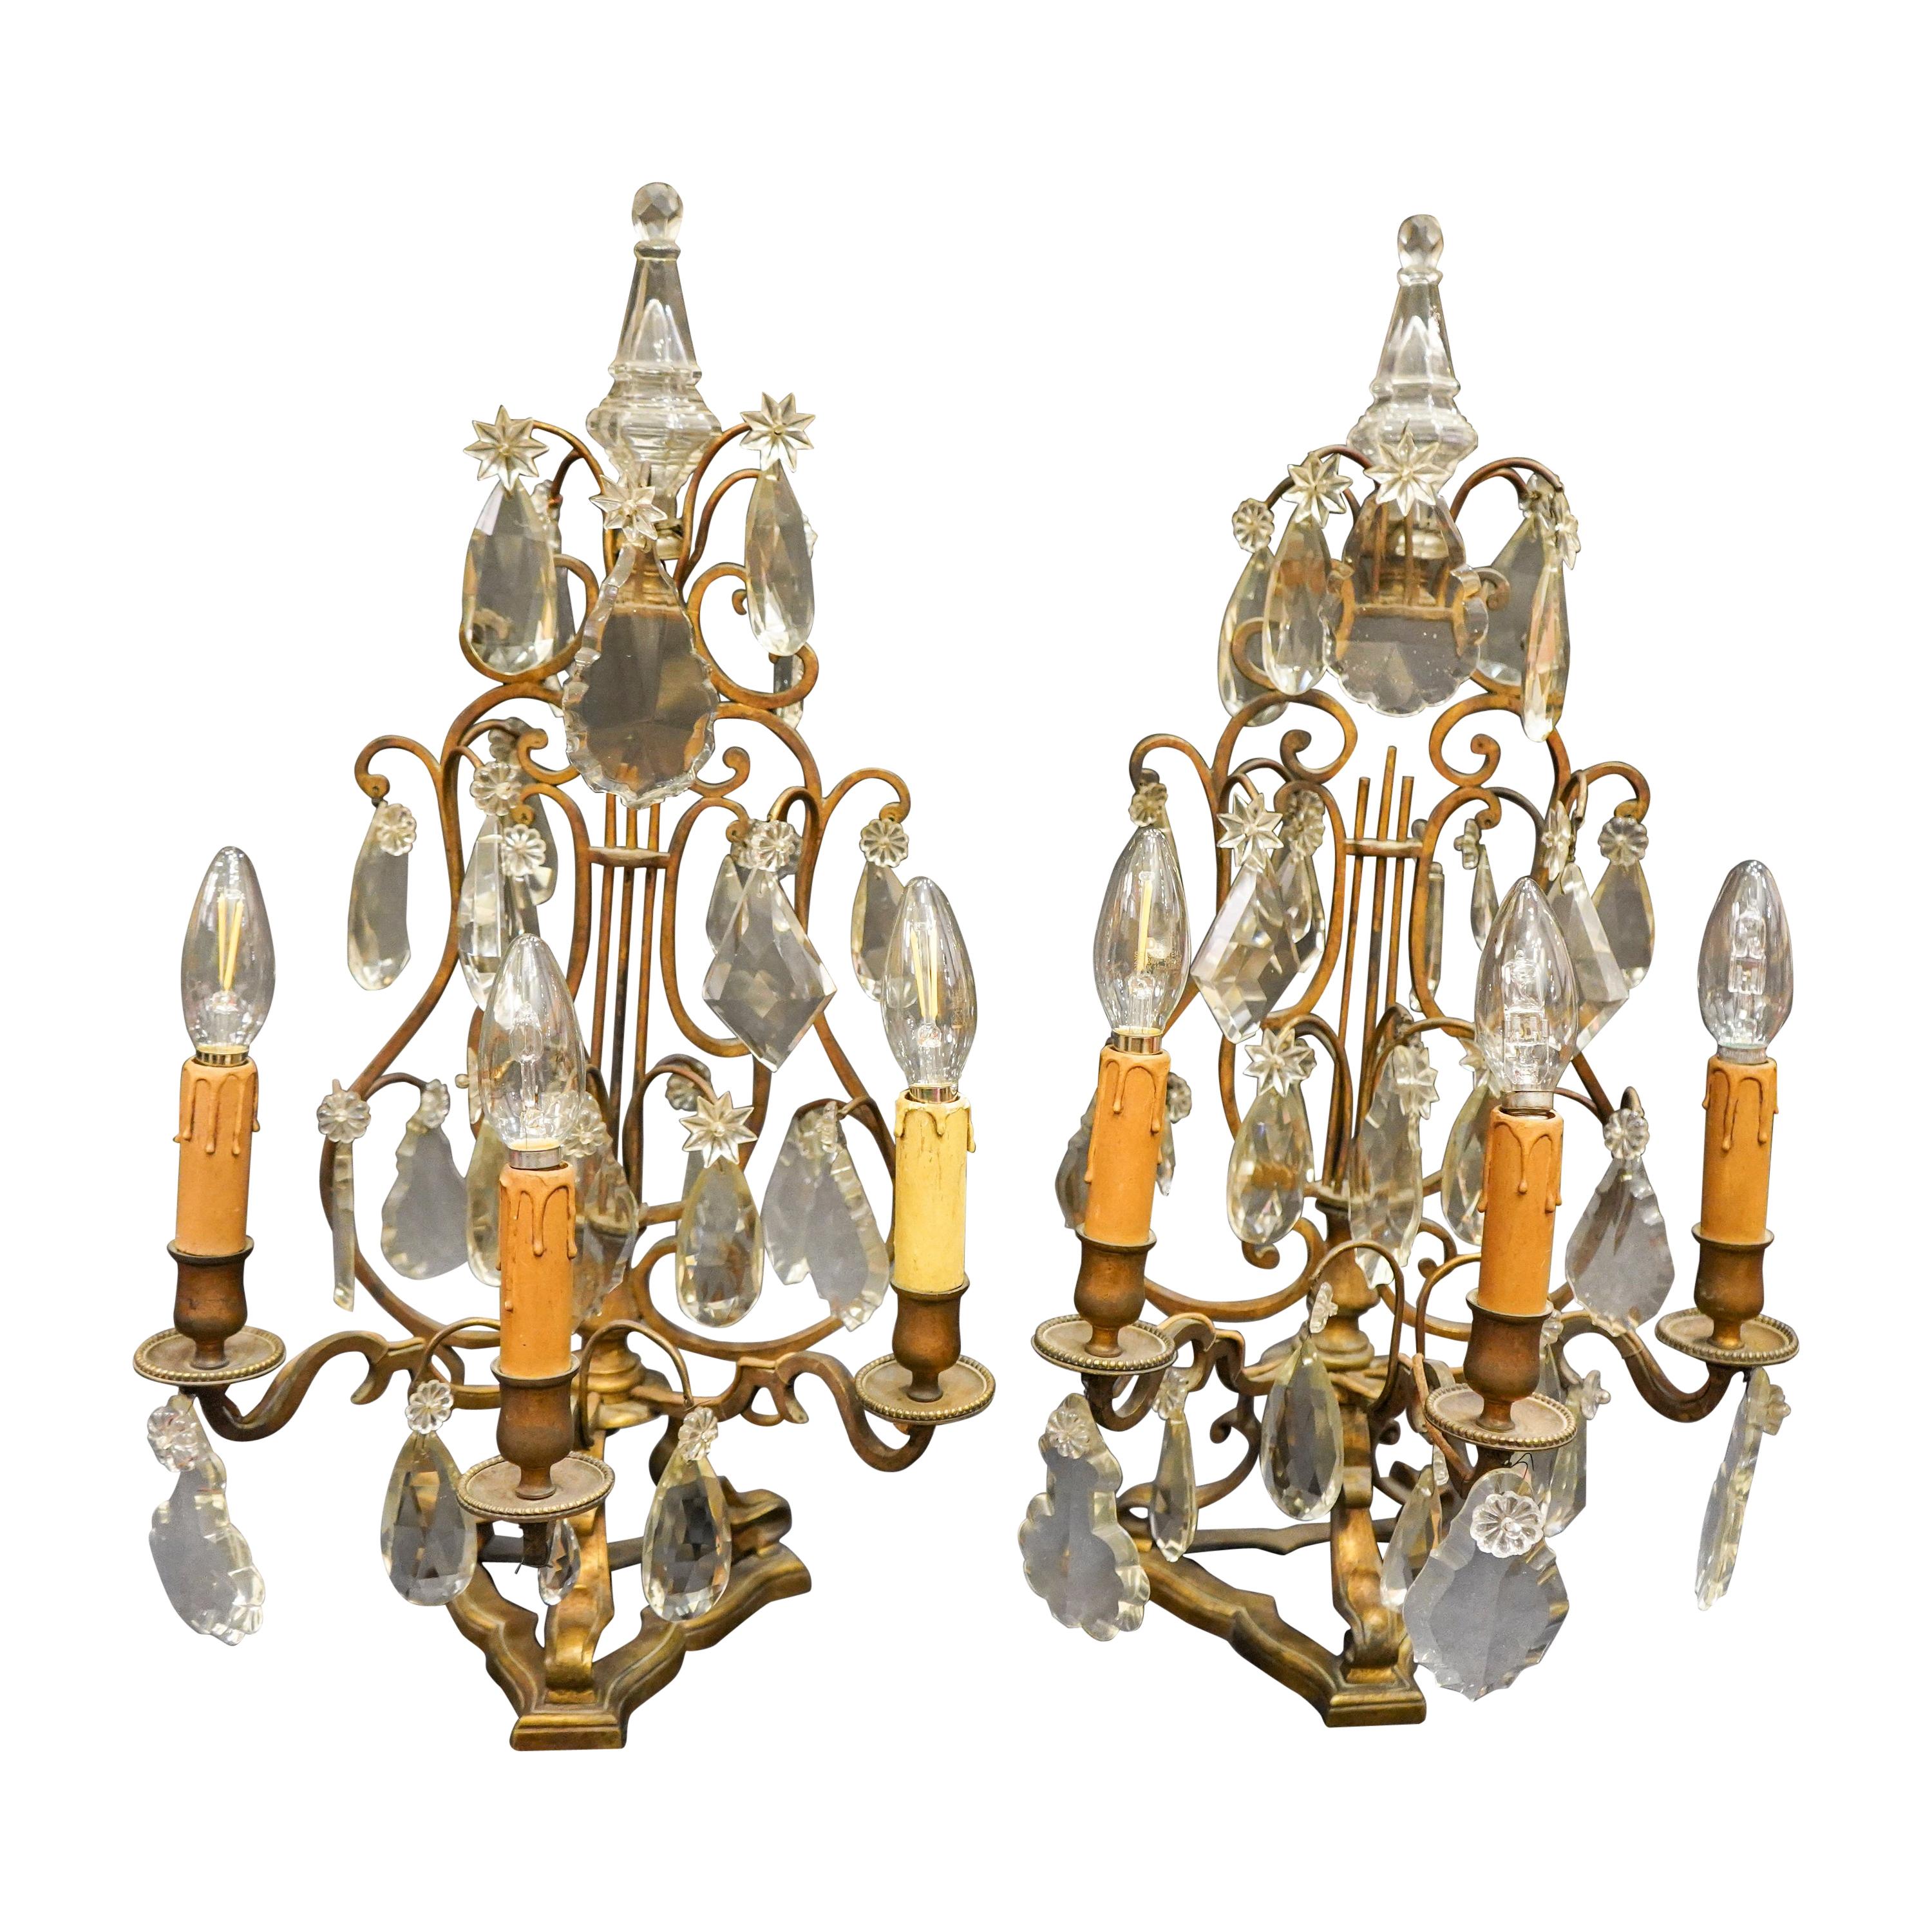 19th Century Rock Crystal and Bronze Set of French Girandoles Electrified